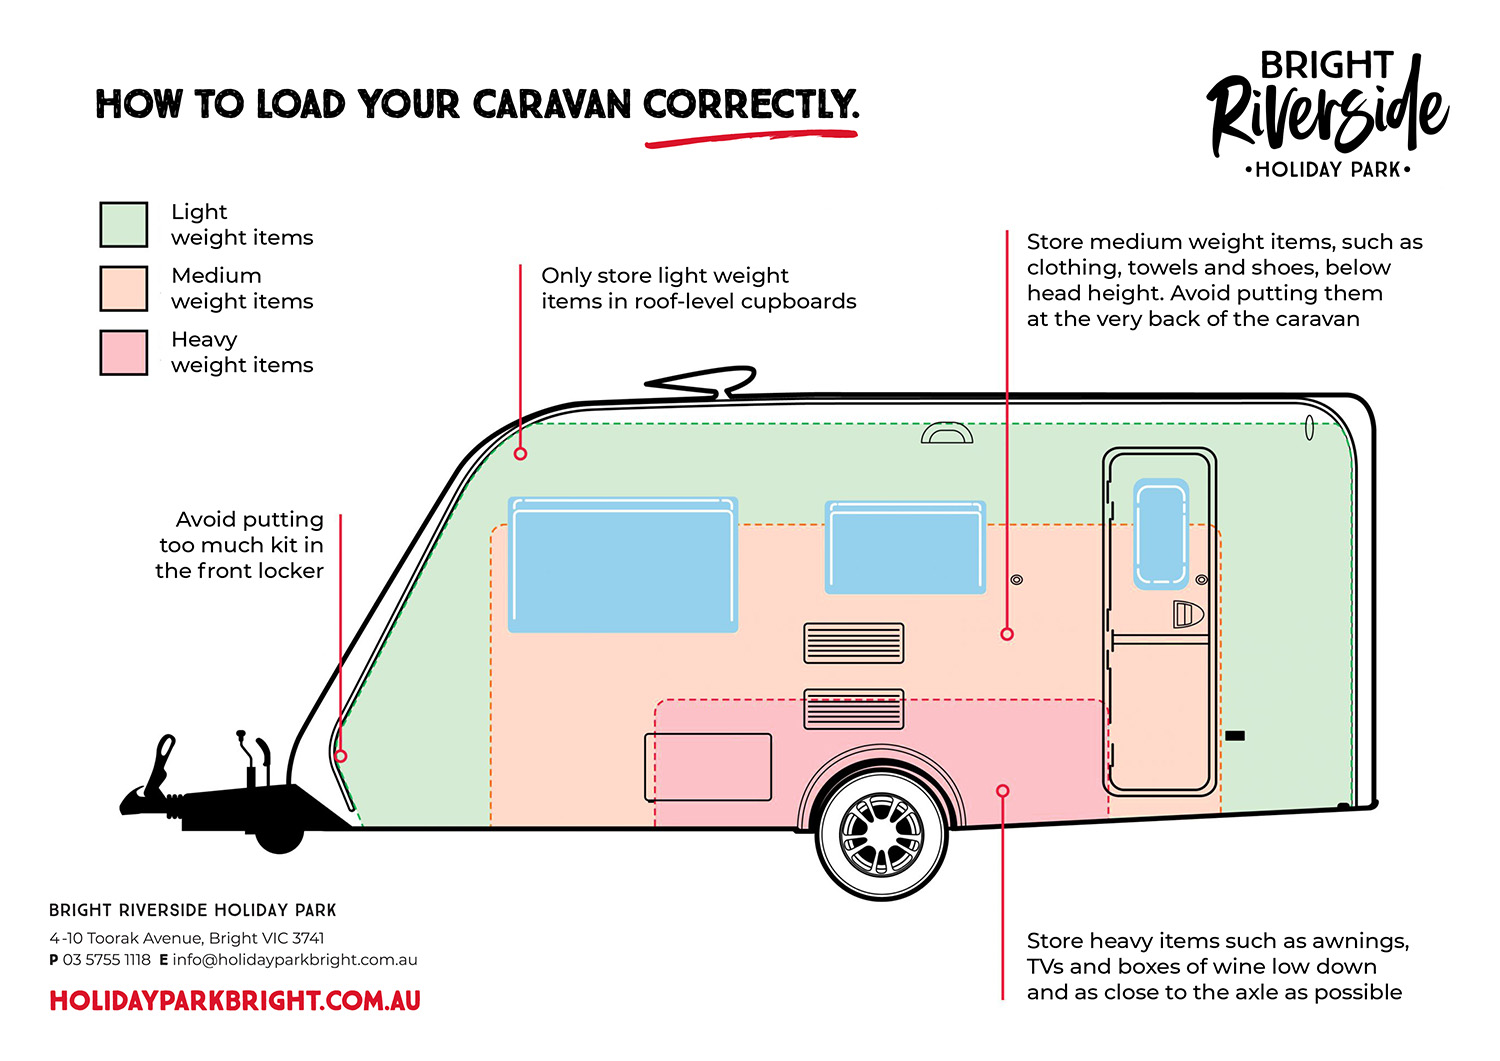 How to pack your caravan correctly